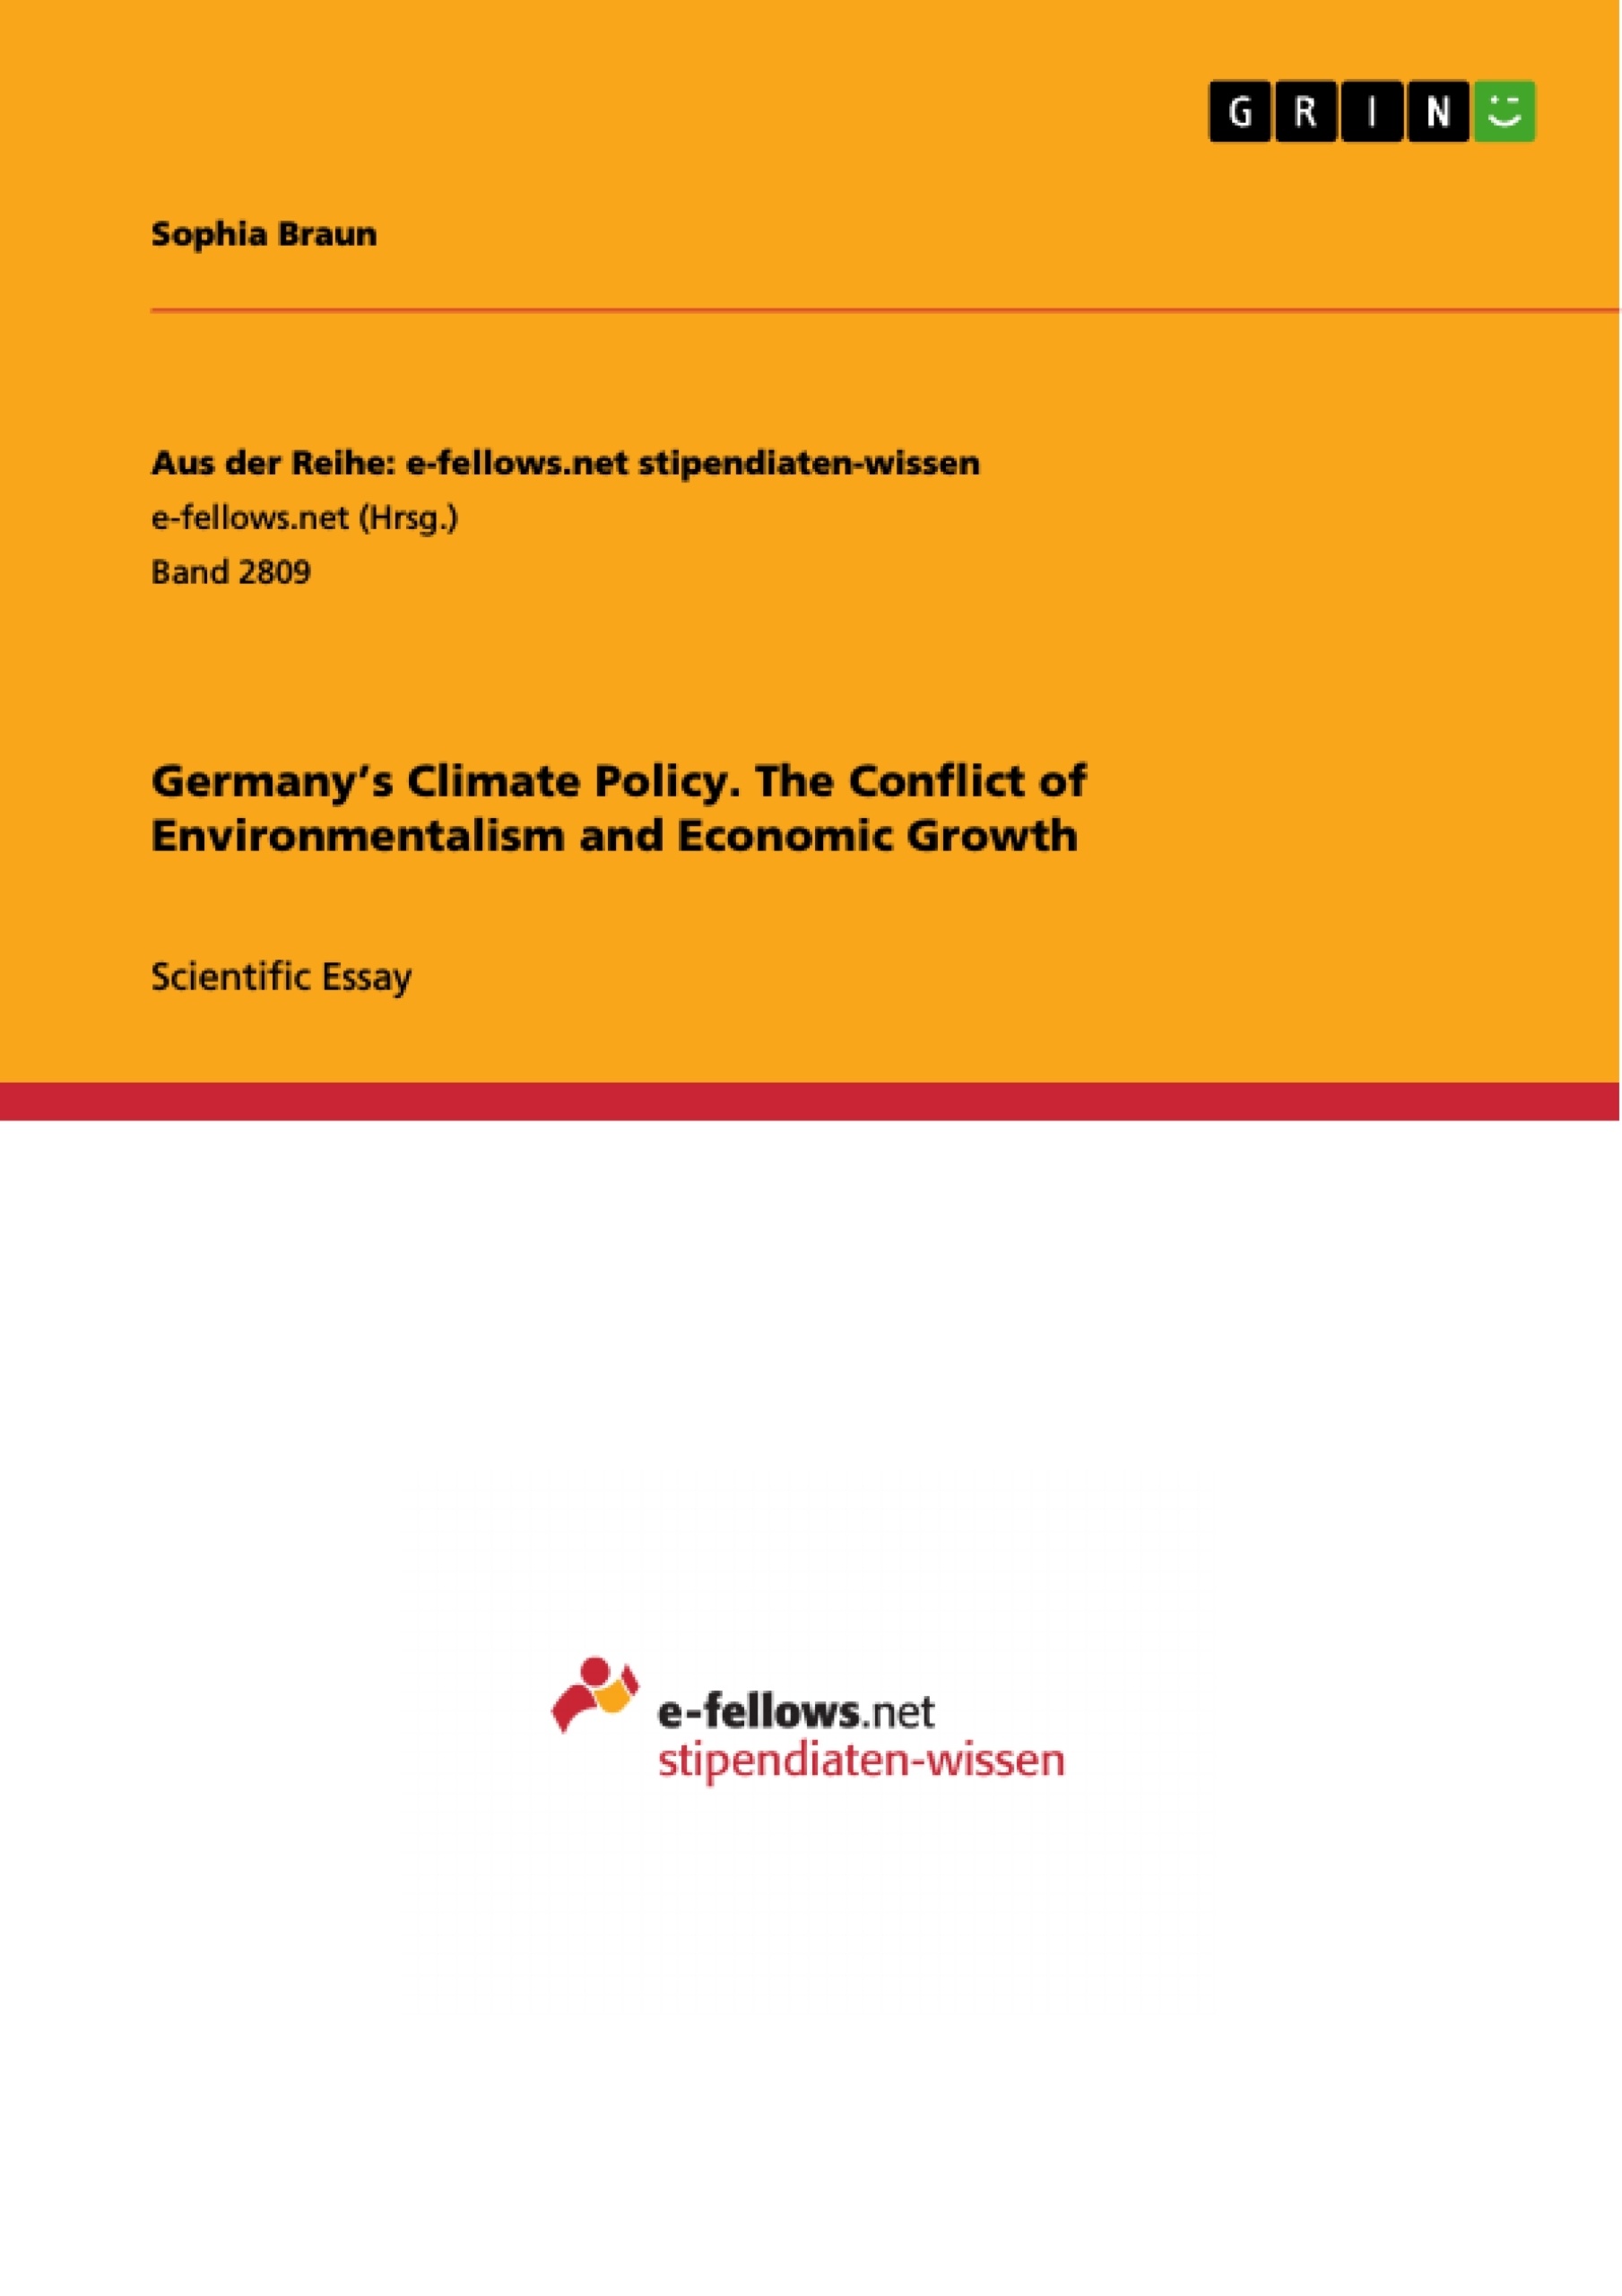 Title: Germany’s Climate Policy. The Conflict of Environmentalism and Economic Growth